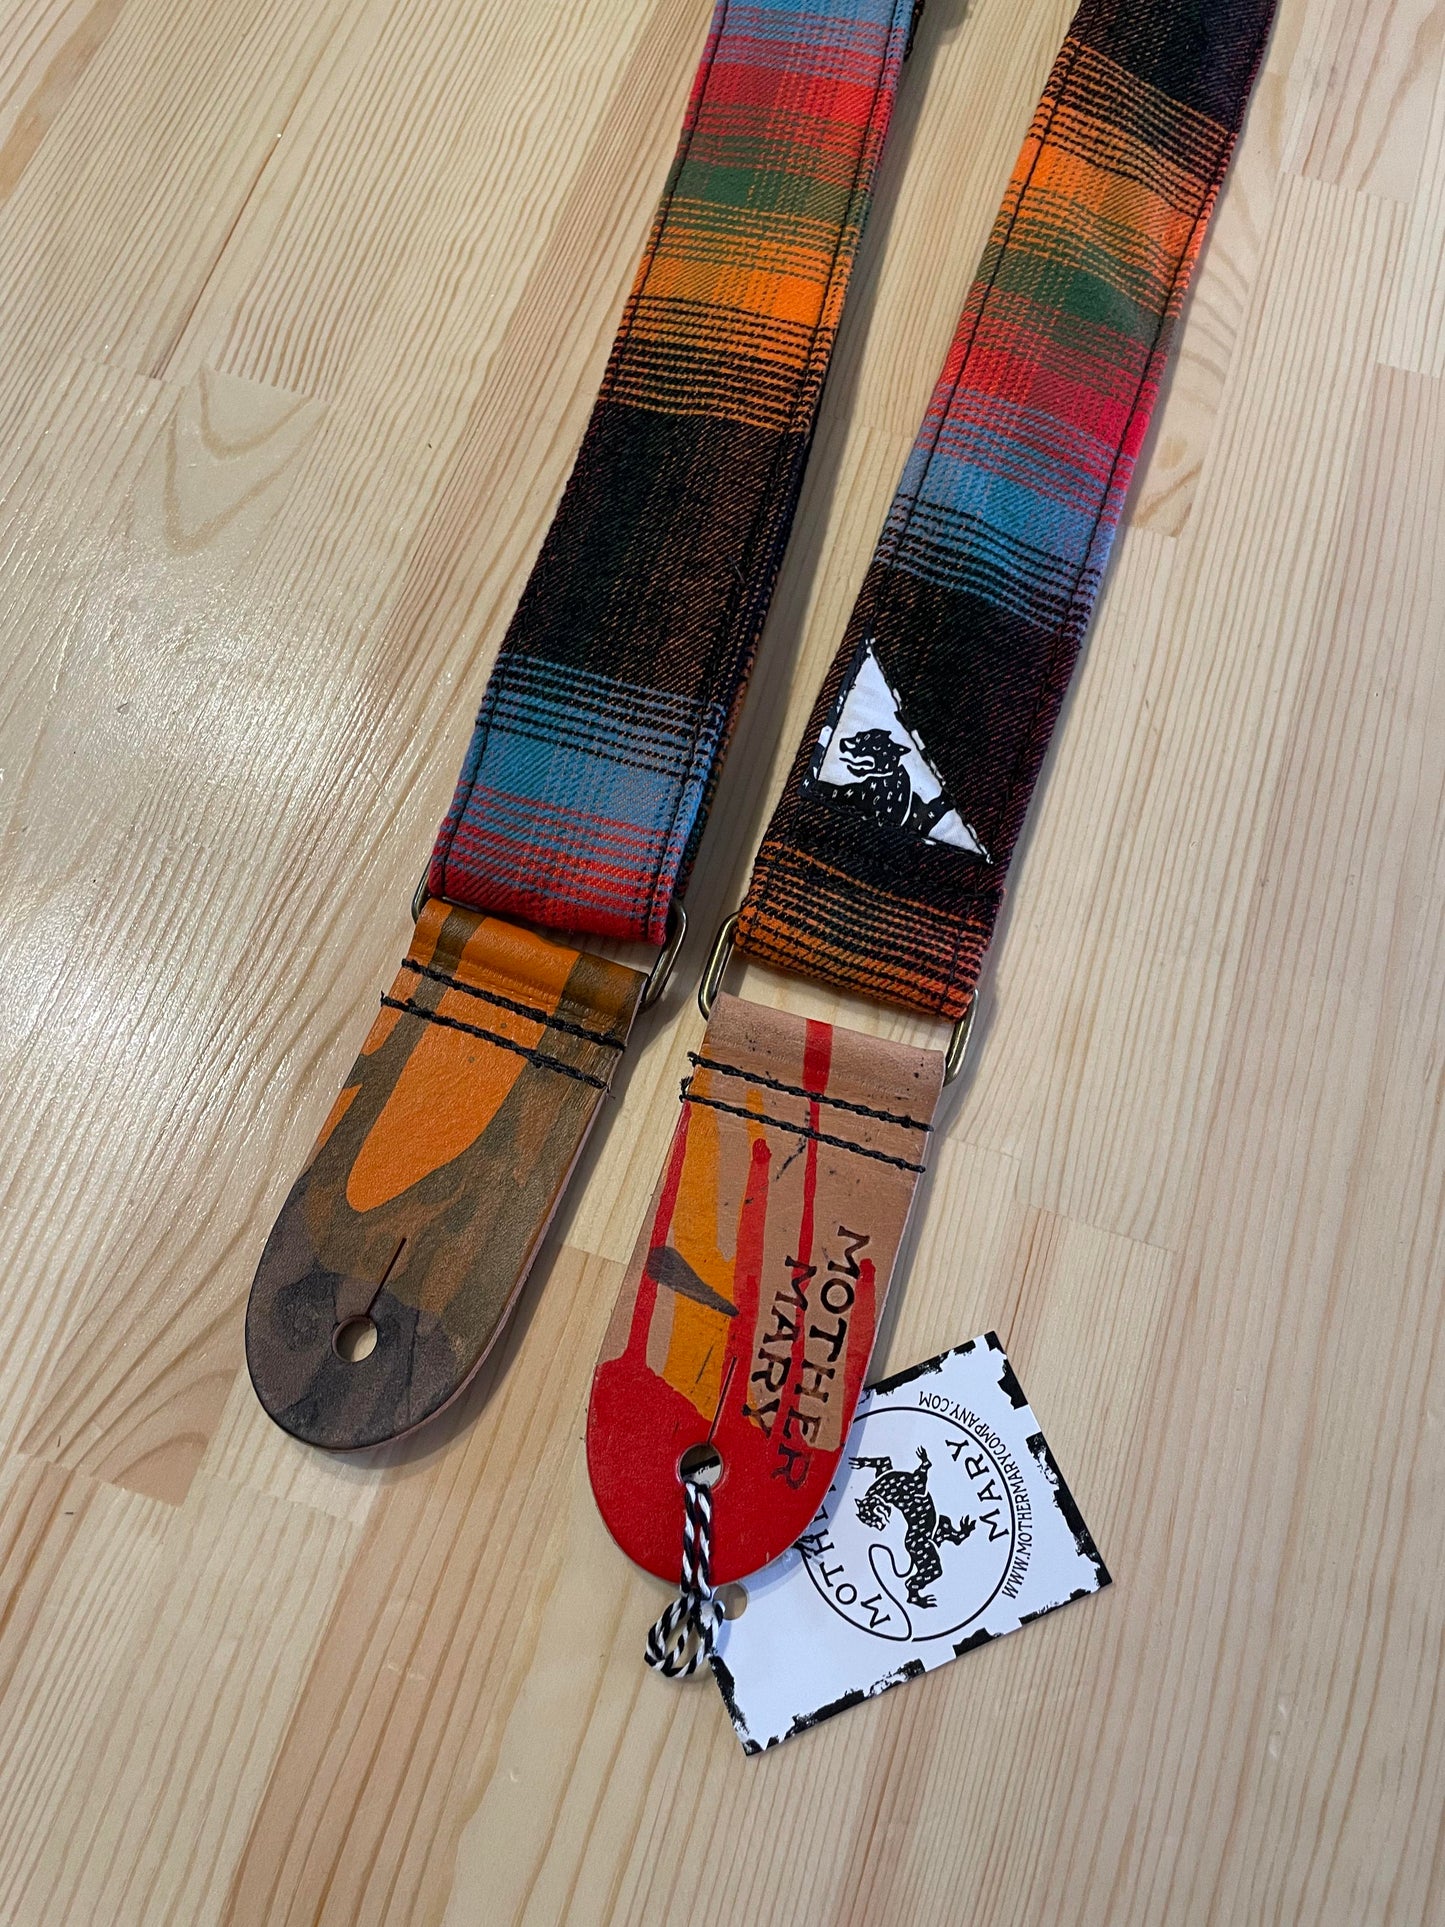 Mother Mary Company "Crazy Horse" Guitar Strap